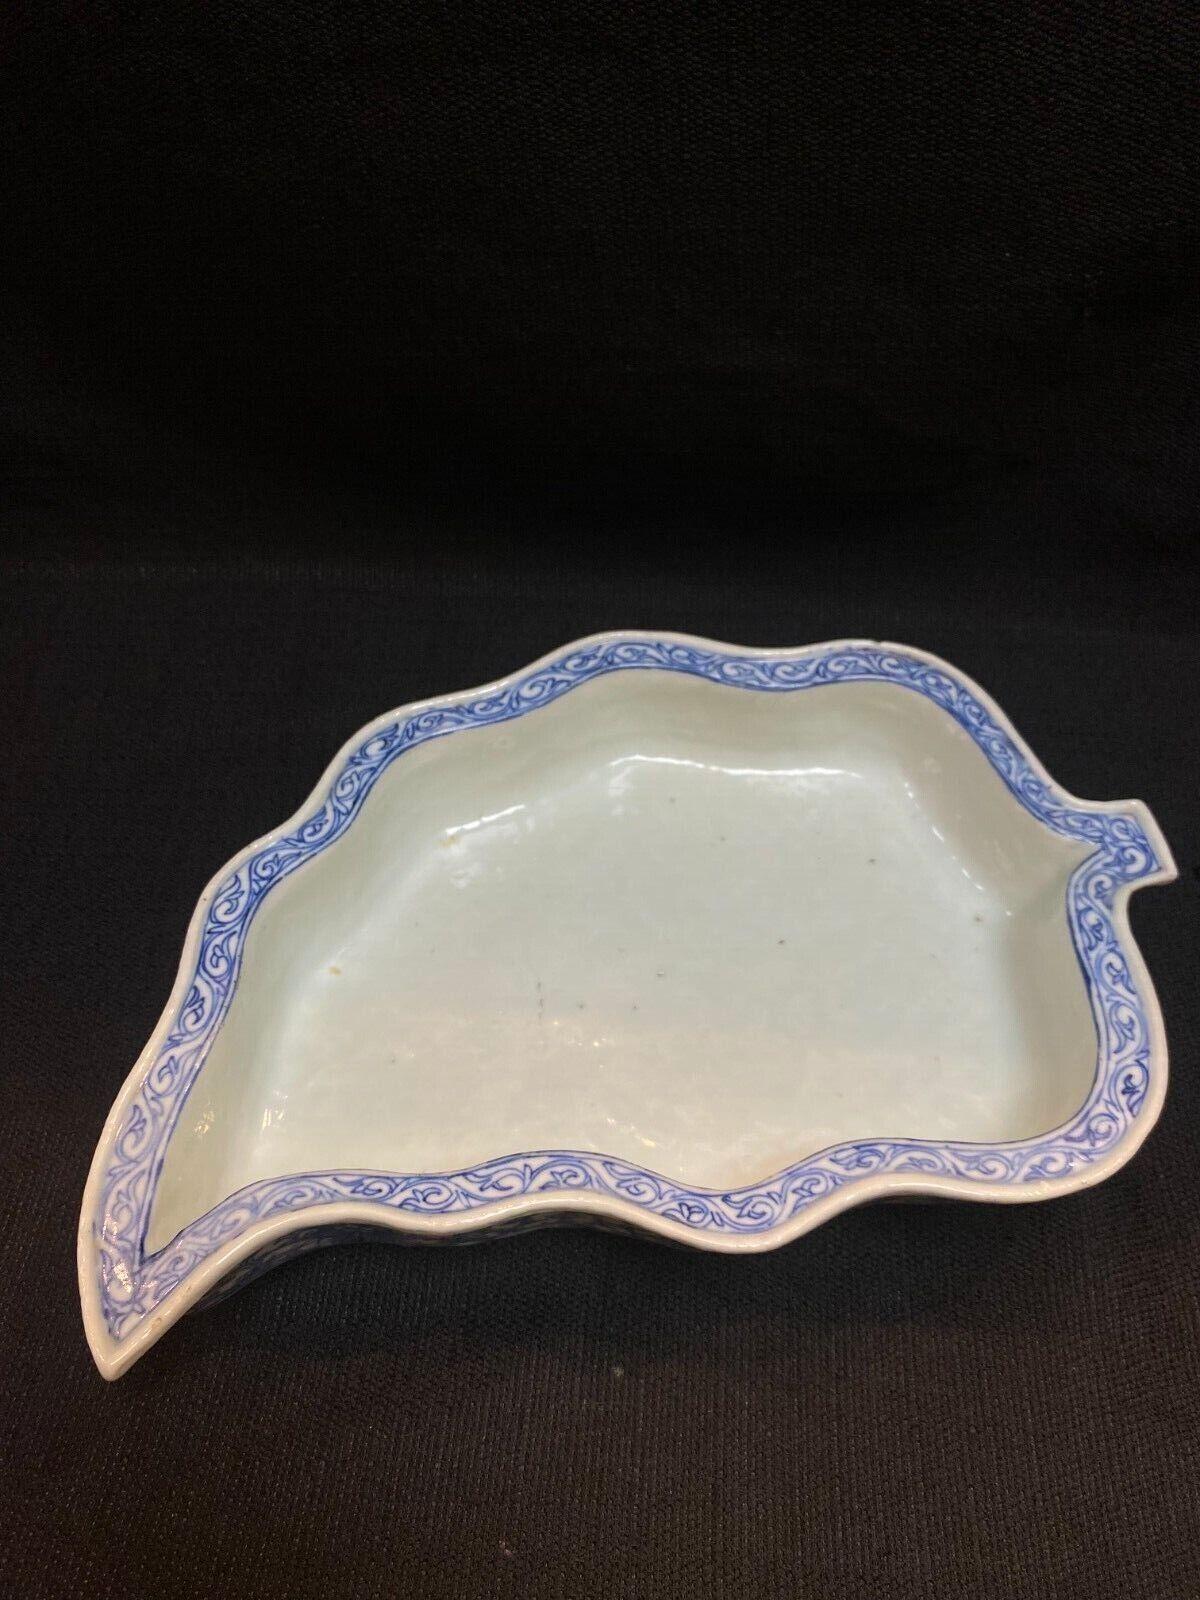 Qing, antique blue and white lotus pattern leaf shape porcelain narcissus bow/ ?,????????????(??)
Condition: Shows normal sign of wear and use, No damage or crack. 
Approximate Size: L: 27cm, W: 16.5 cm, H: 5 cm. Please refer the Size and the